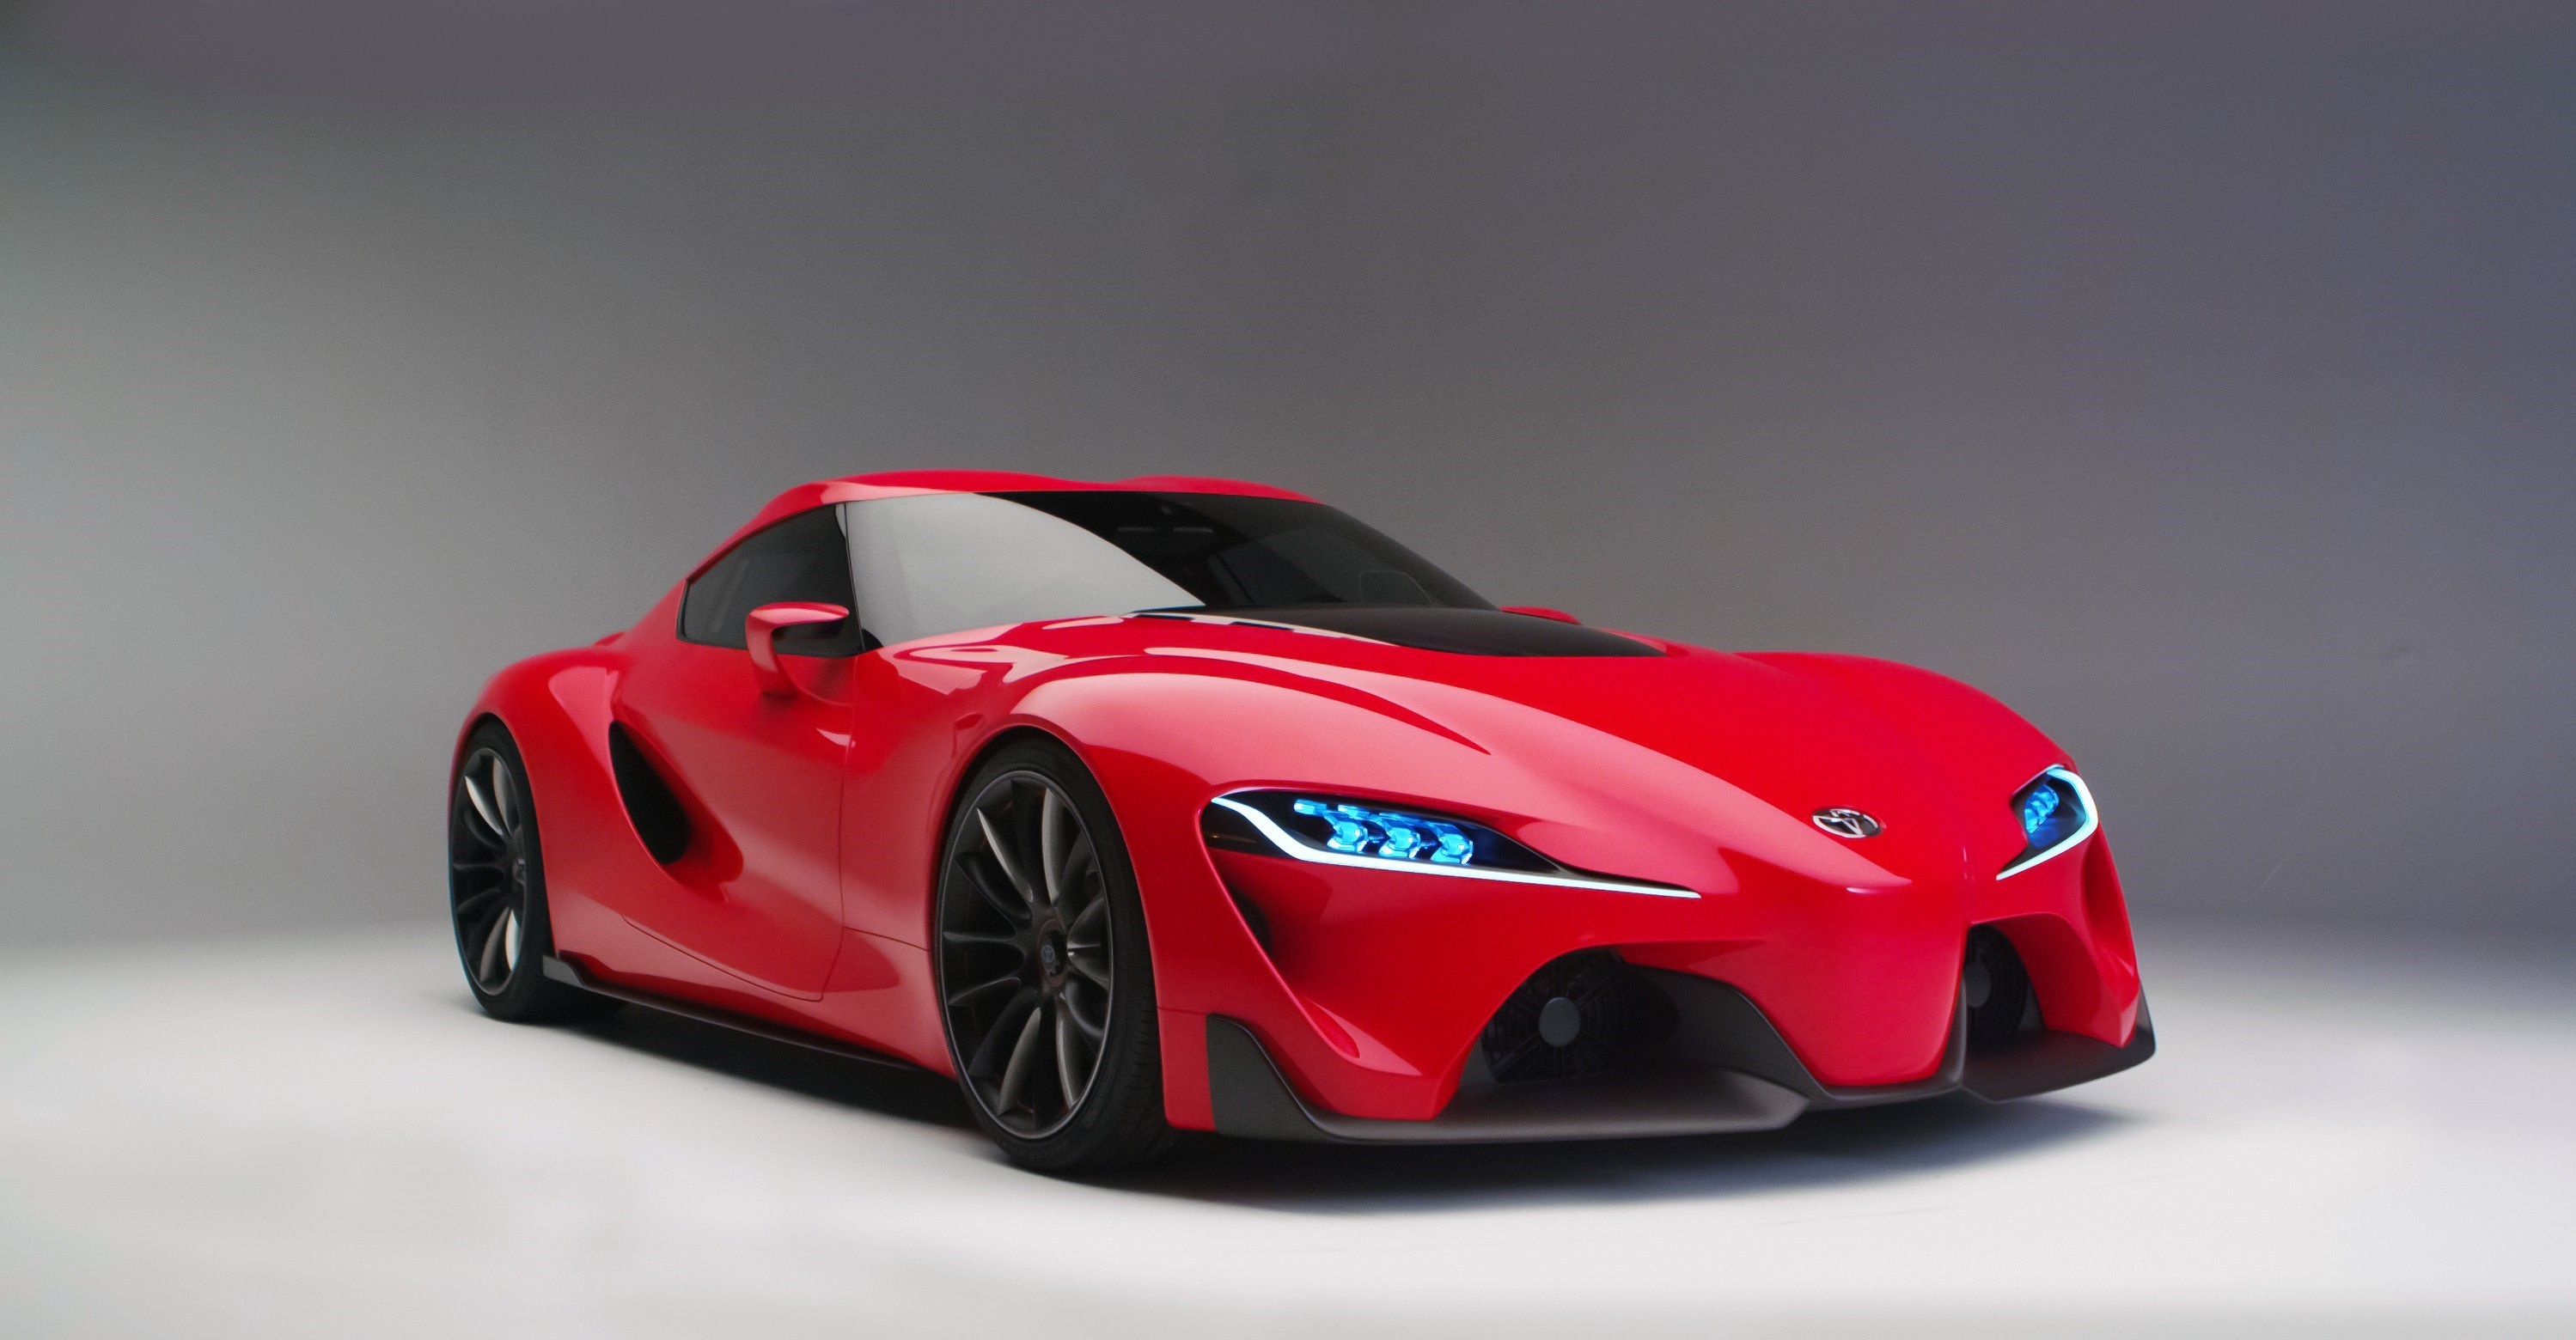 car, Red Cars, Vehicle, Toyota FT 1, Gray Background